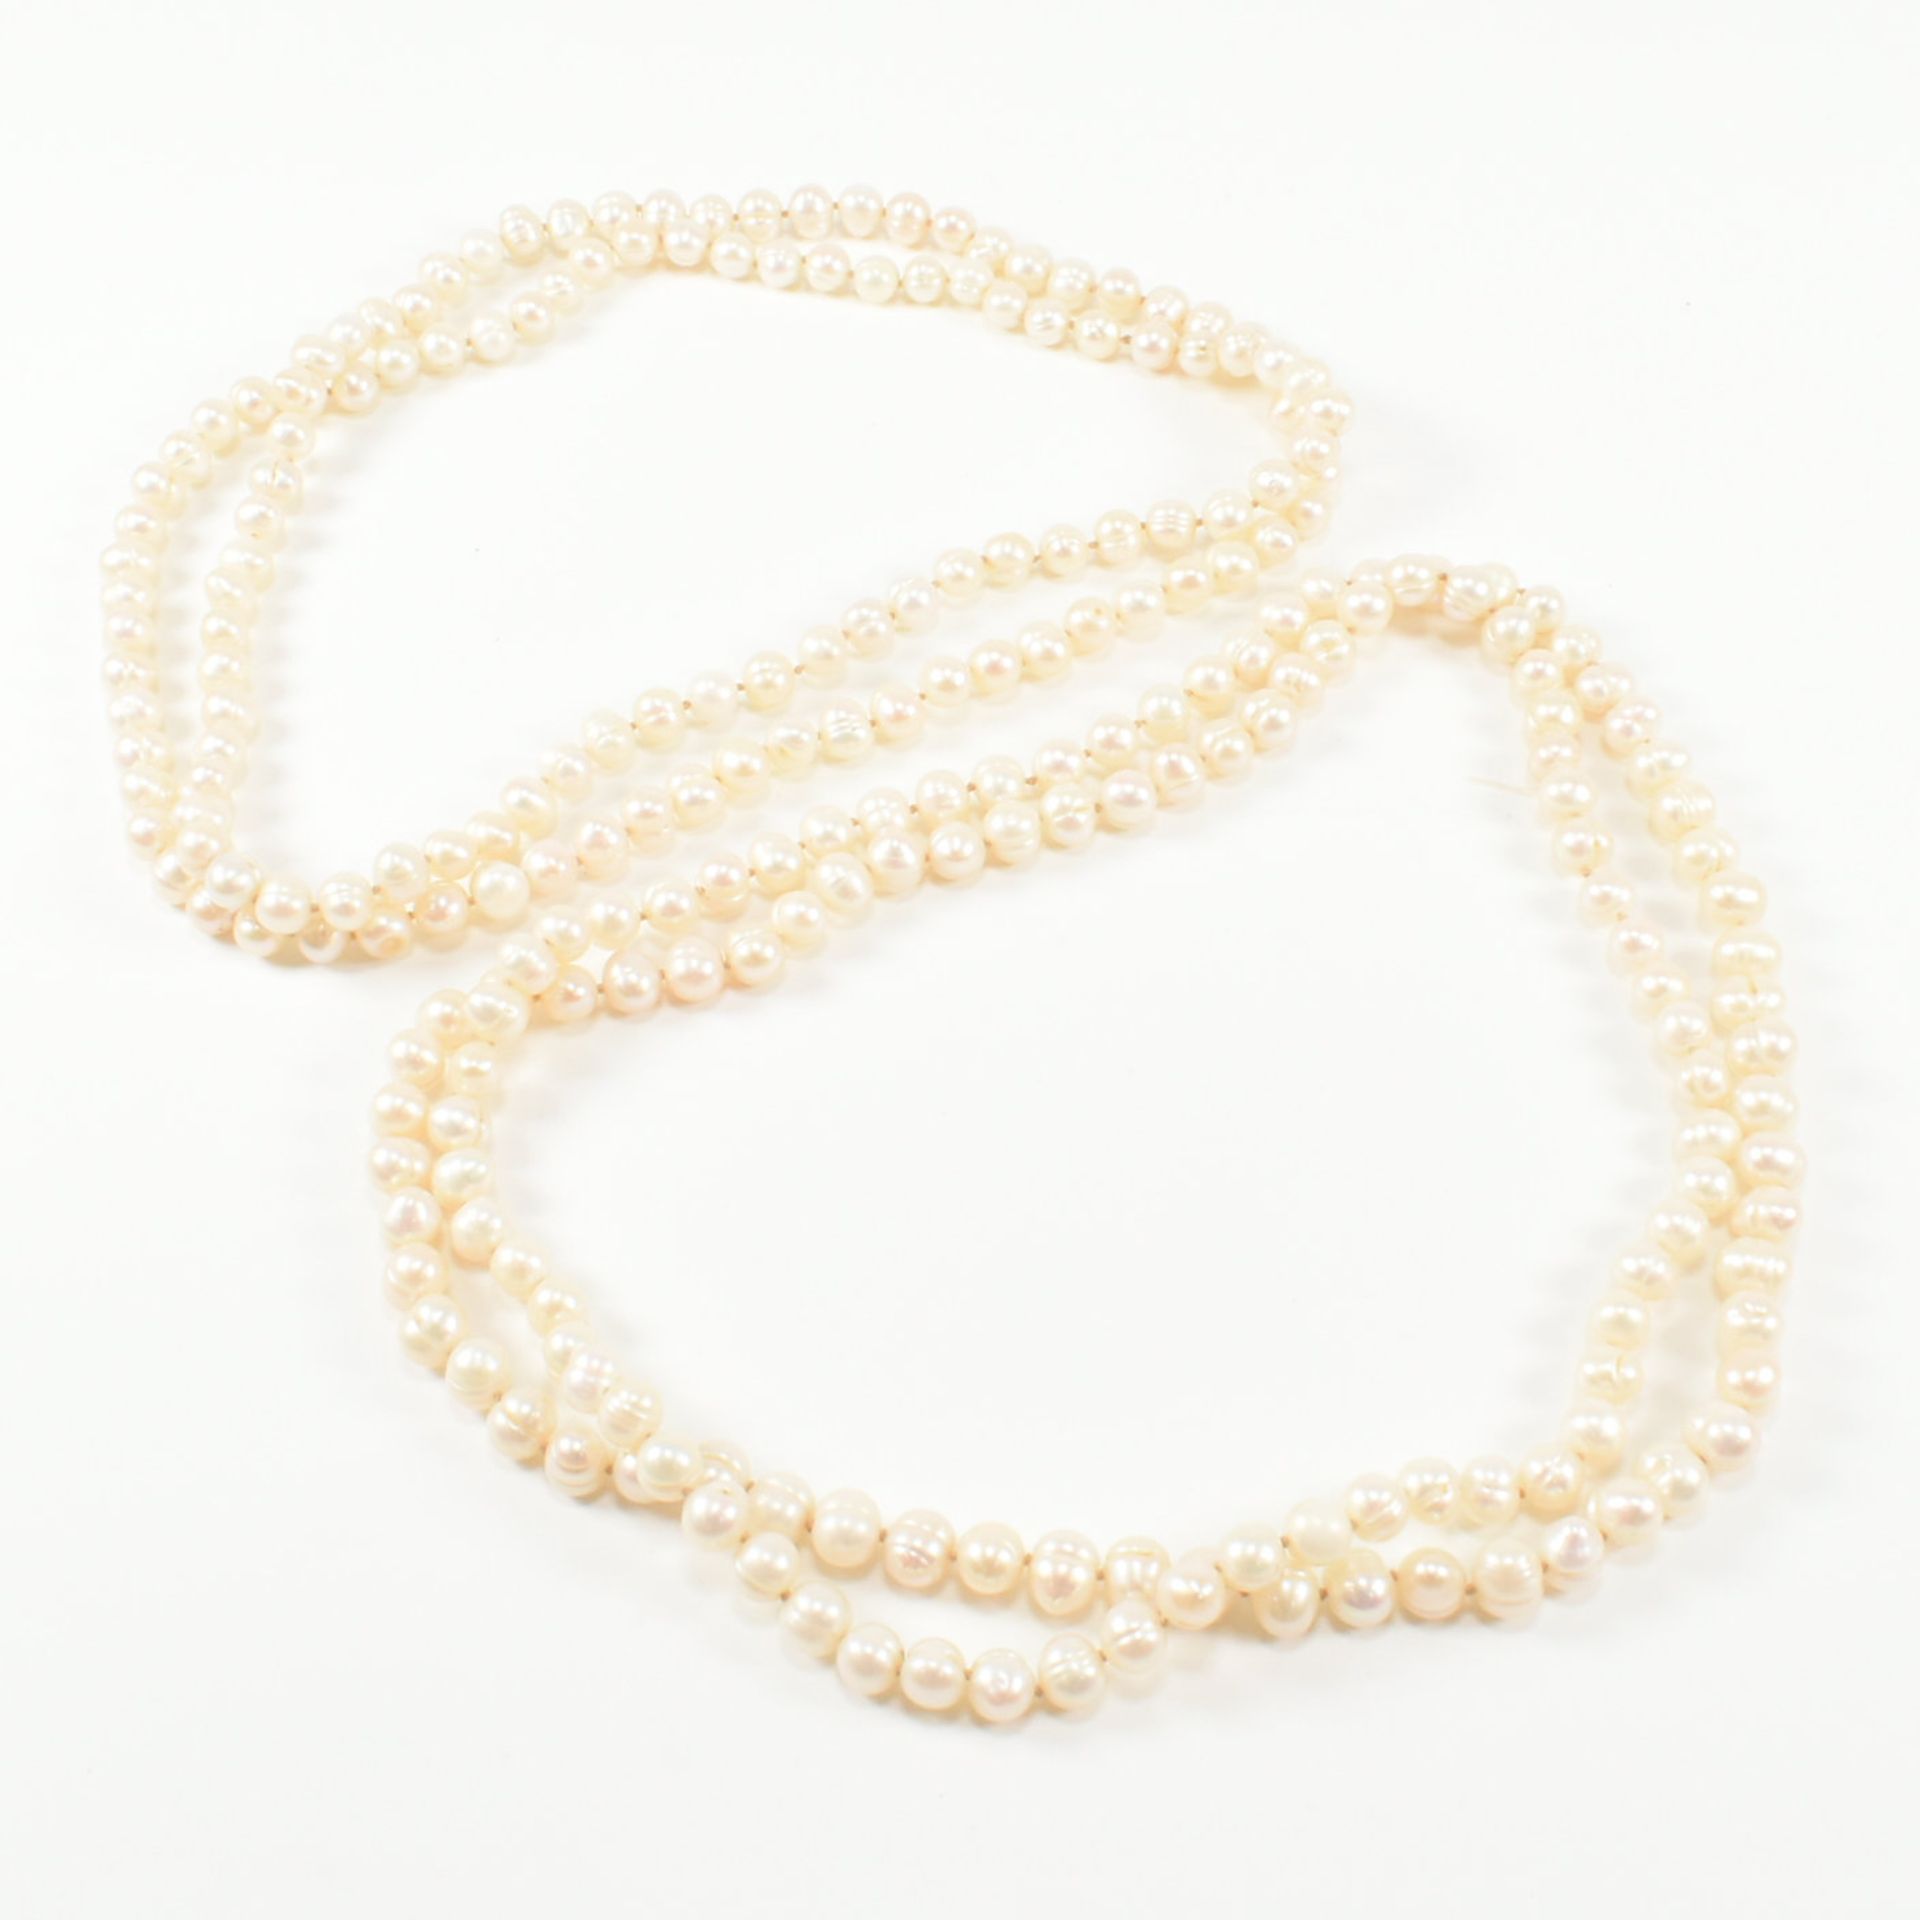 TWO STRING OF CULTURED BAROQUE PEARLS - Image 4 of 6